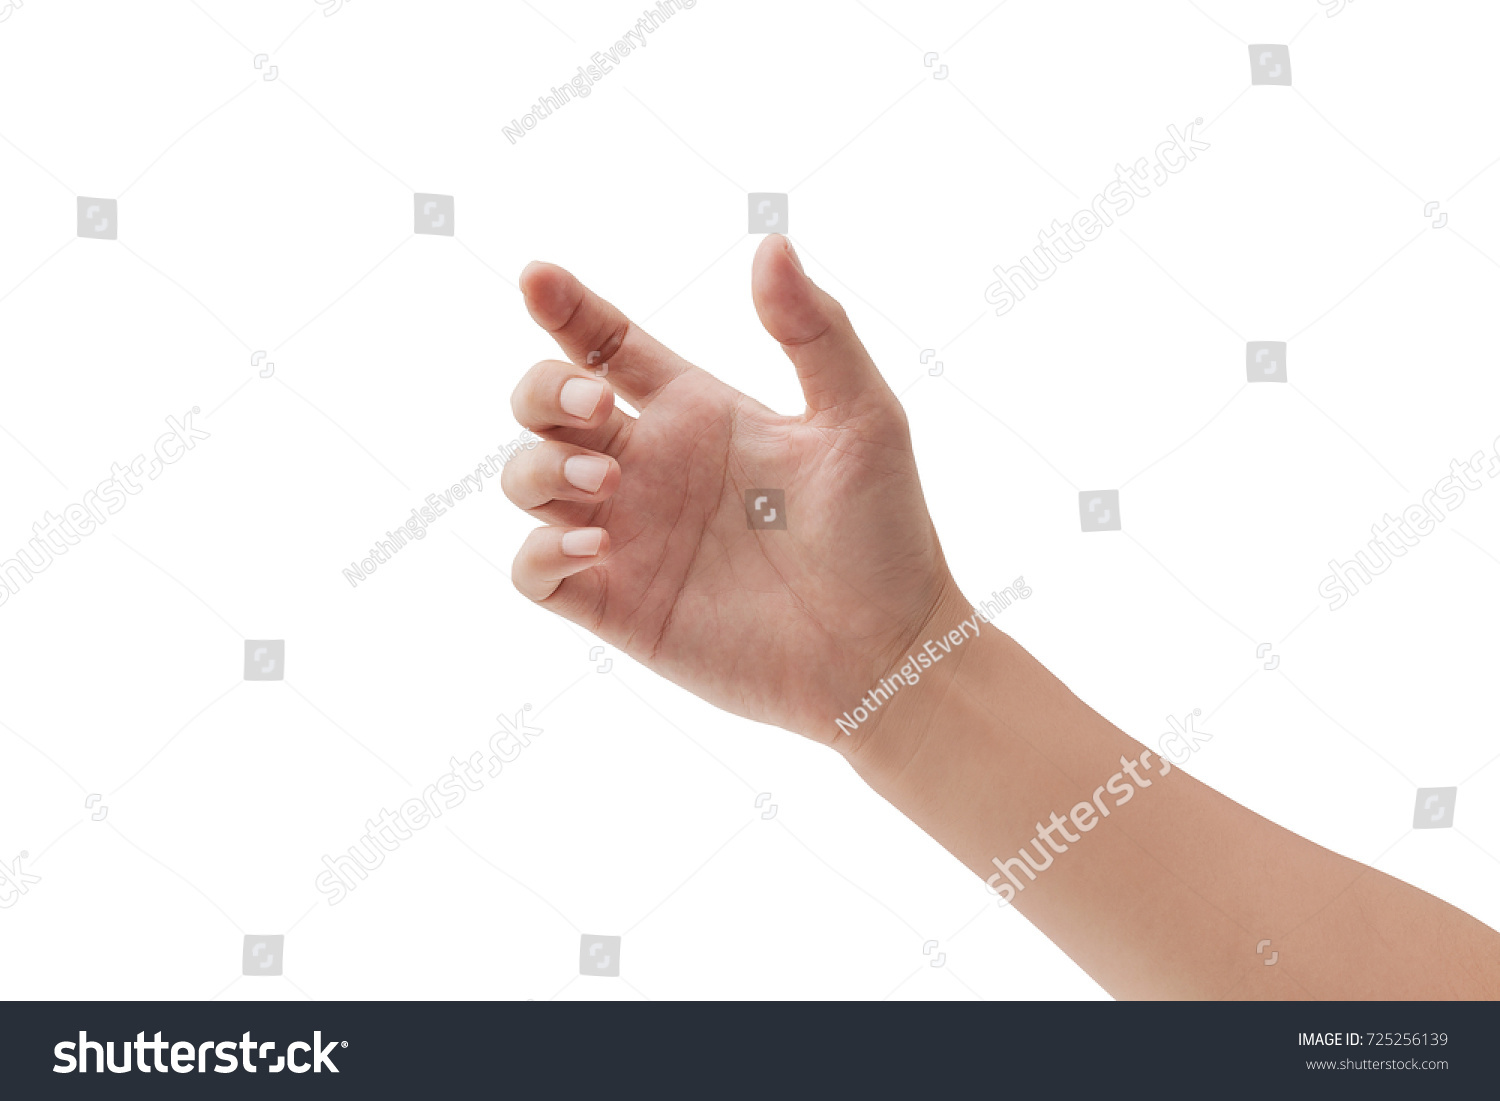 a hand holding something like a bottle or smartphone on white backgrounds, isolated #725256139